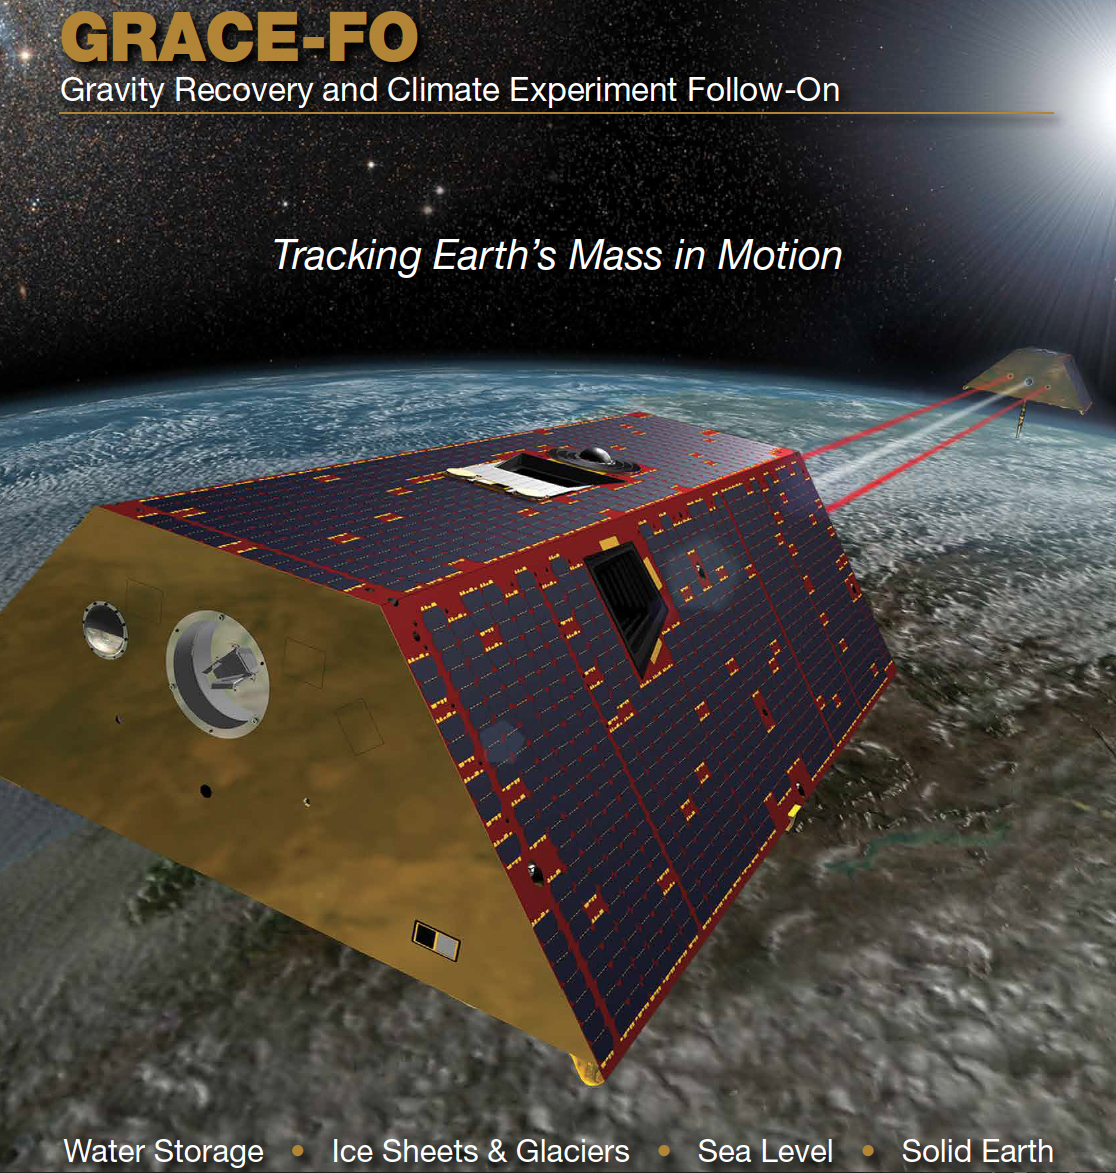 GRACE Follow-On (GRACE-FO) continues
the legacy of GRACE, tracking Earth’s water movement and surface mass
changes across the planet. Monitoring changes in ice sheets and glaciers,
near-surface and underground water storage, the amount of water in large
lakes and rivers, as well as changes in sea level and ocean currents provides
an integrated global view of how Earth’s water cycle and energy balance are
evolving.